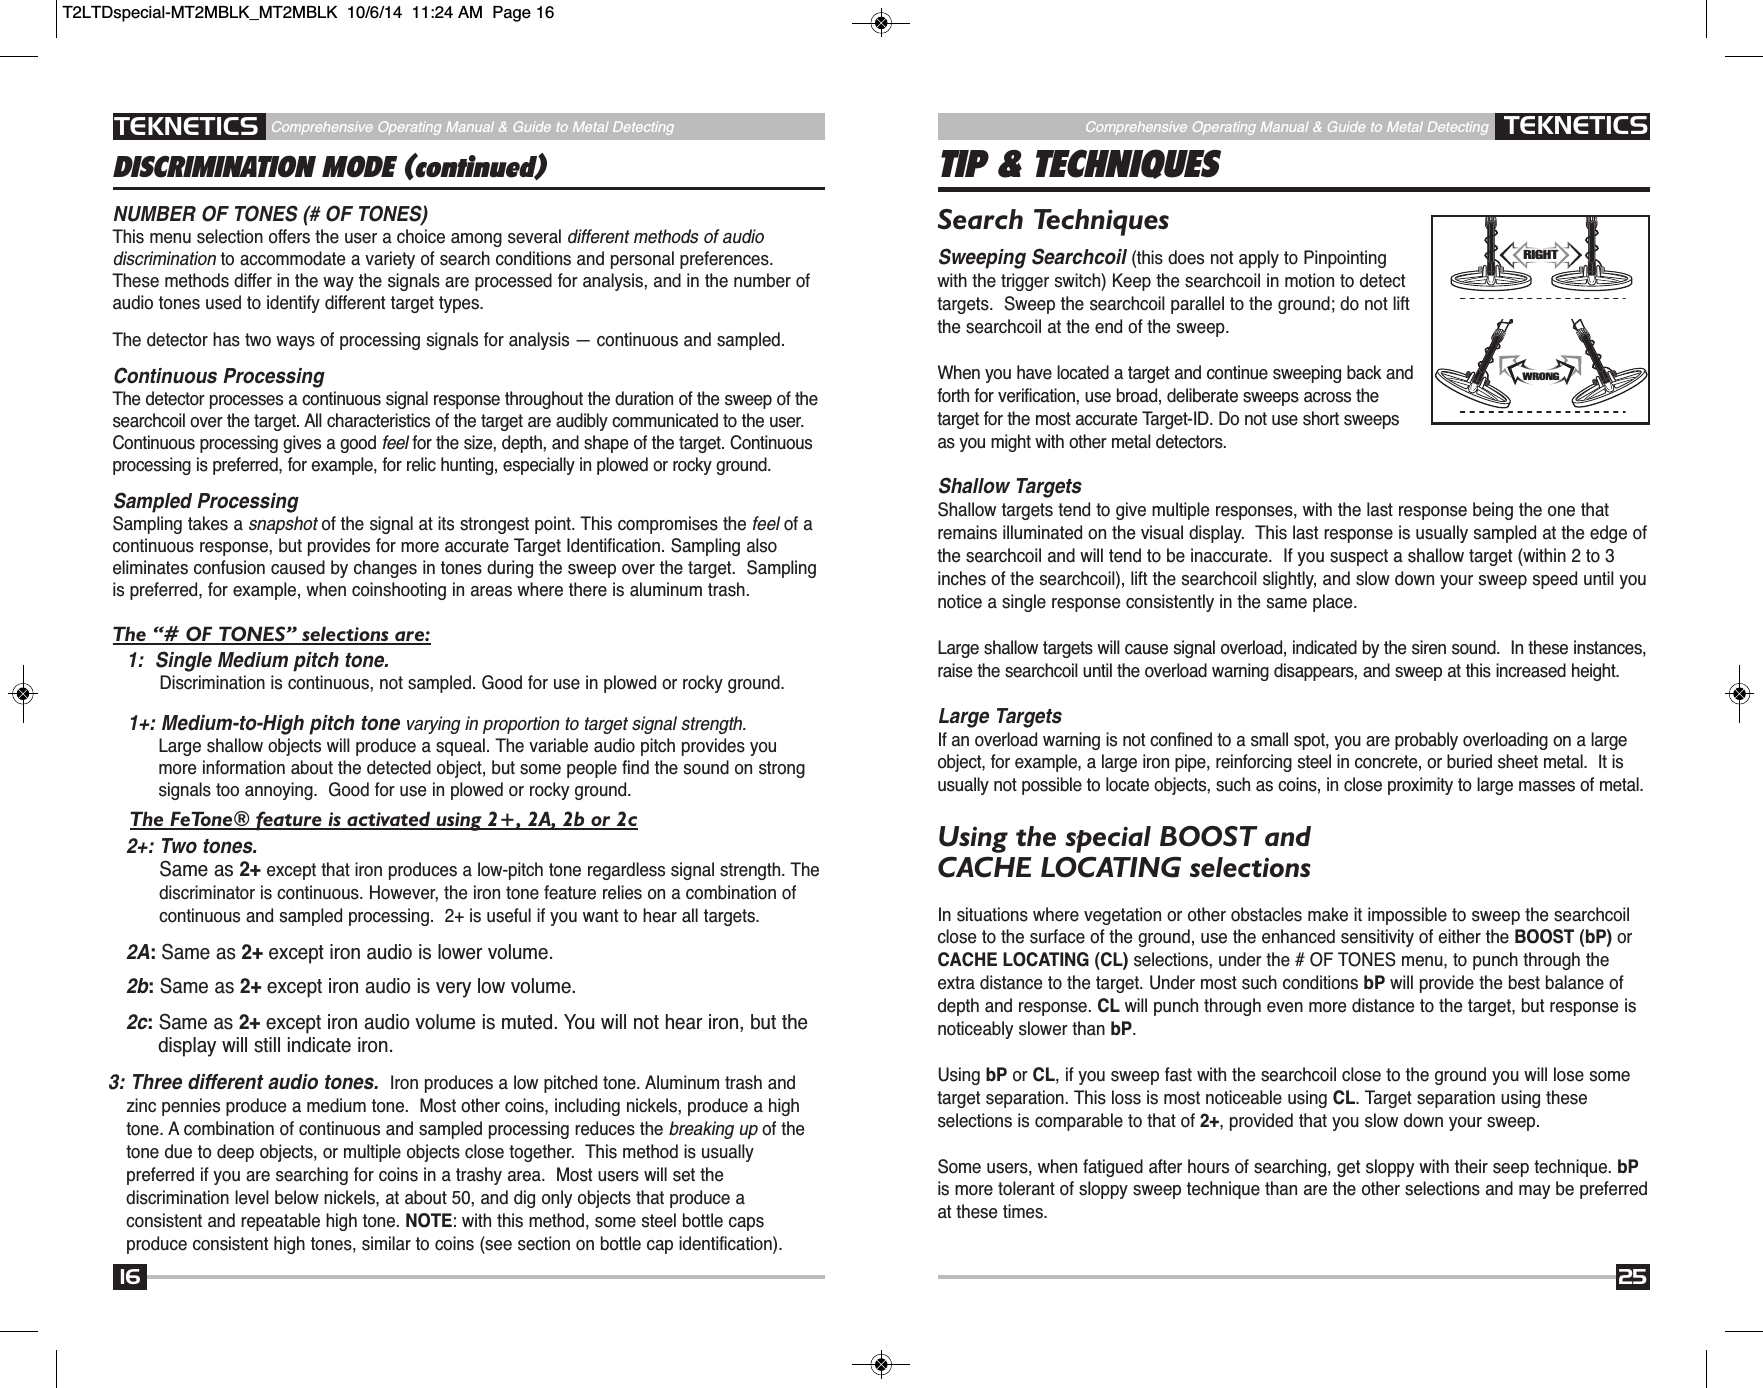 Page 16 of First Texas T2MD Professional Metal Detector User Manual Layout 1